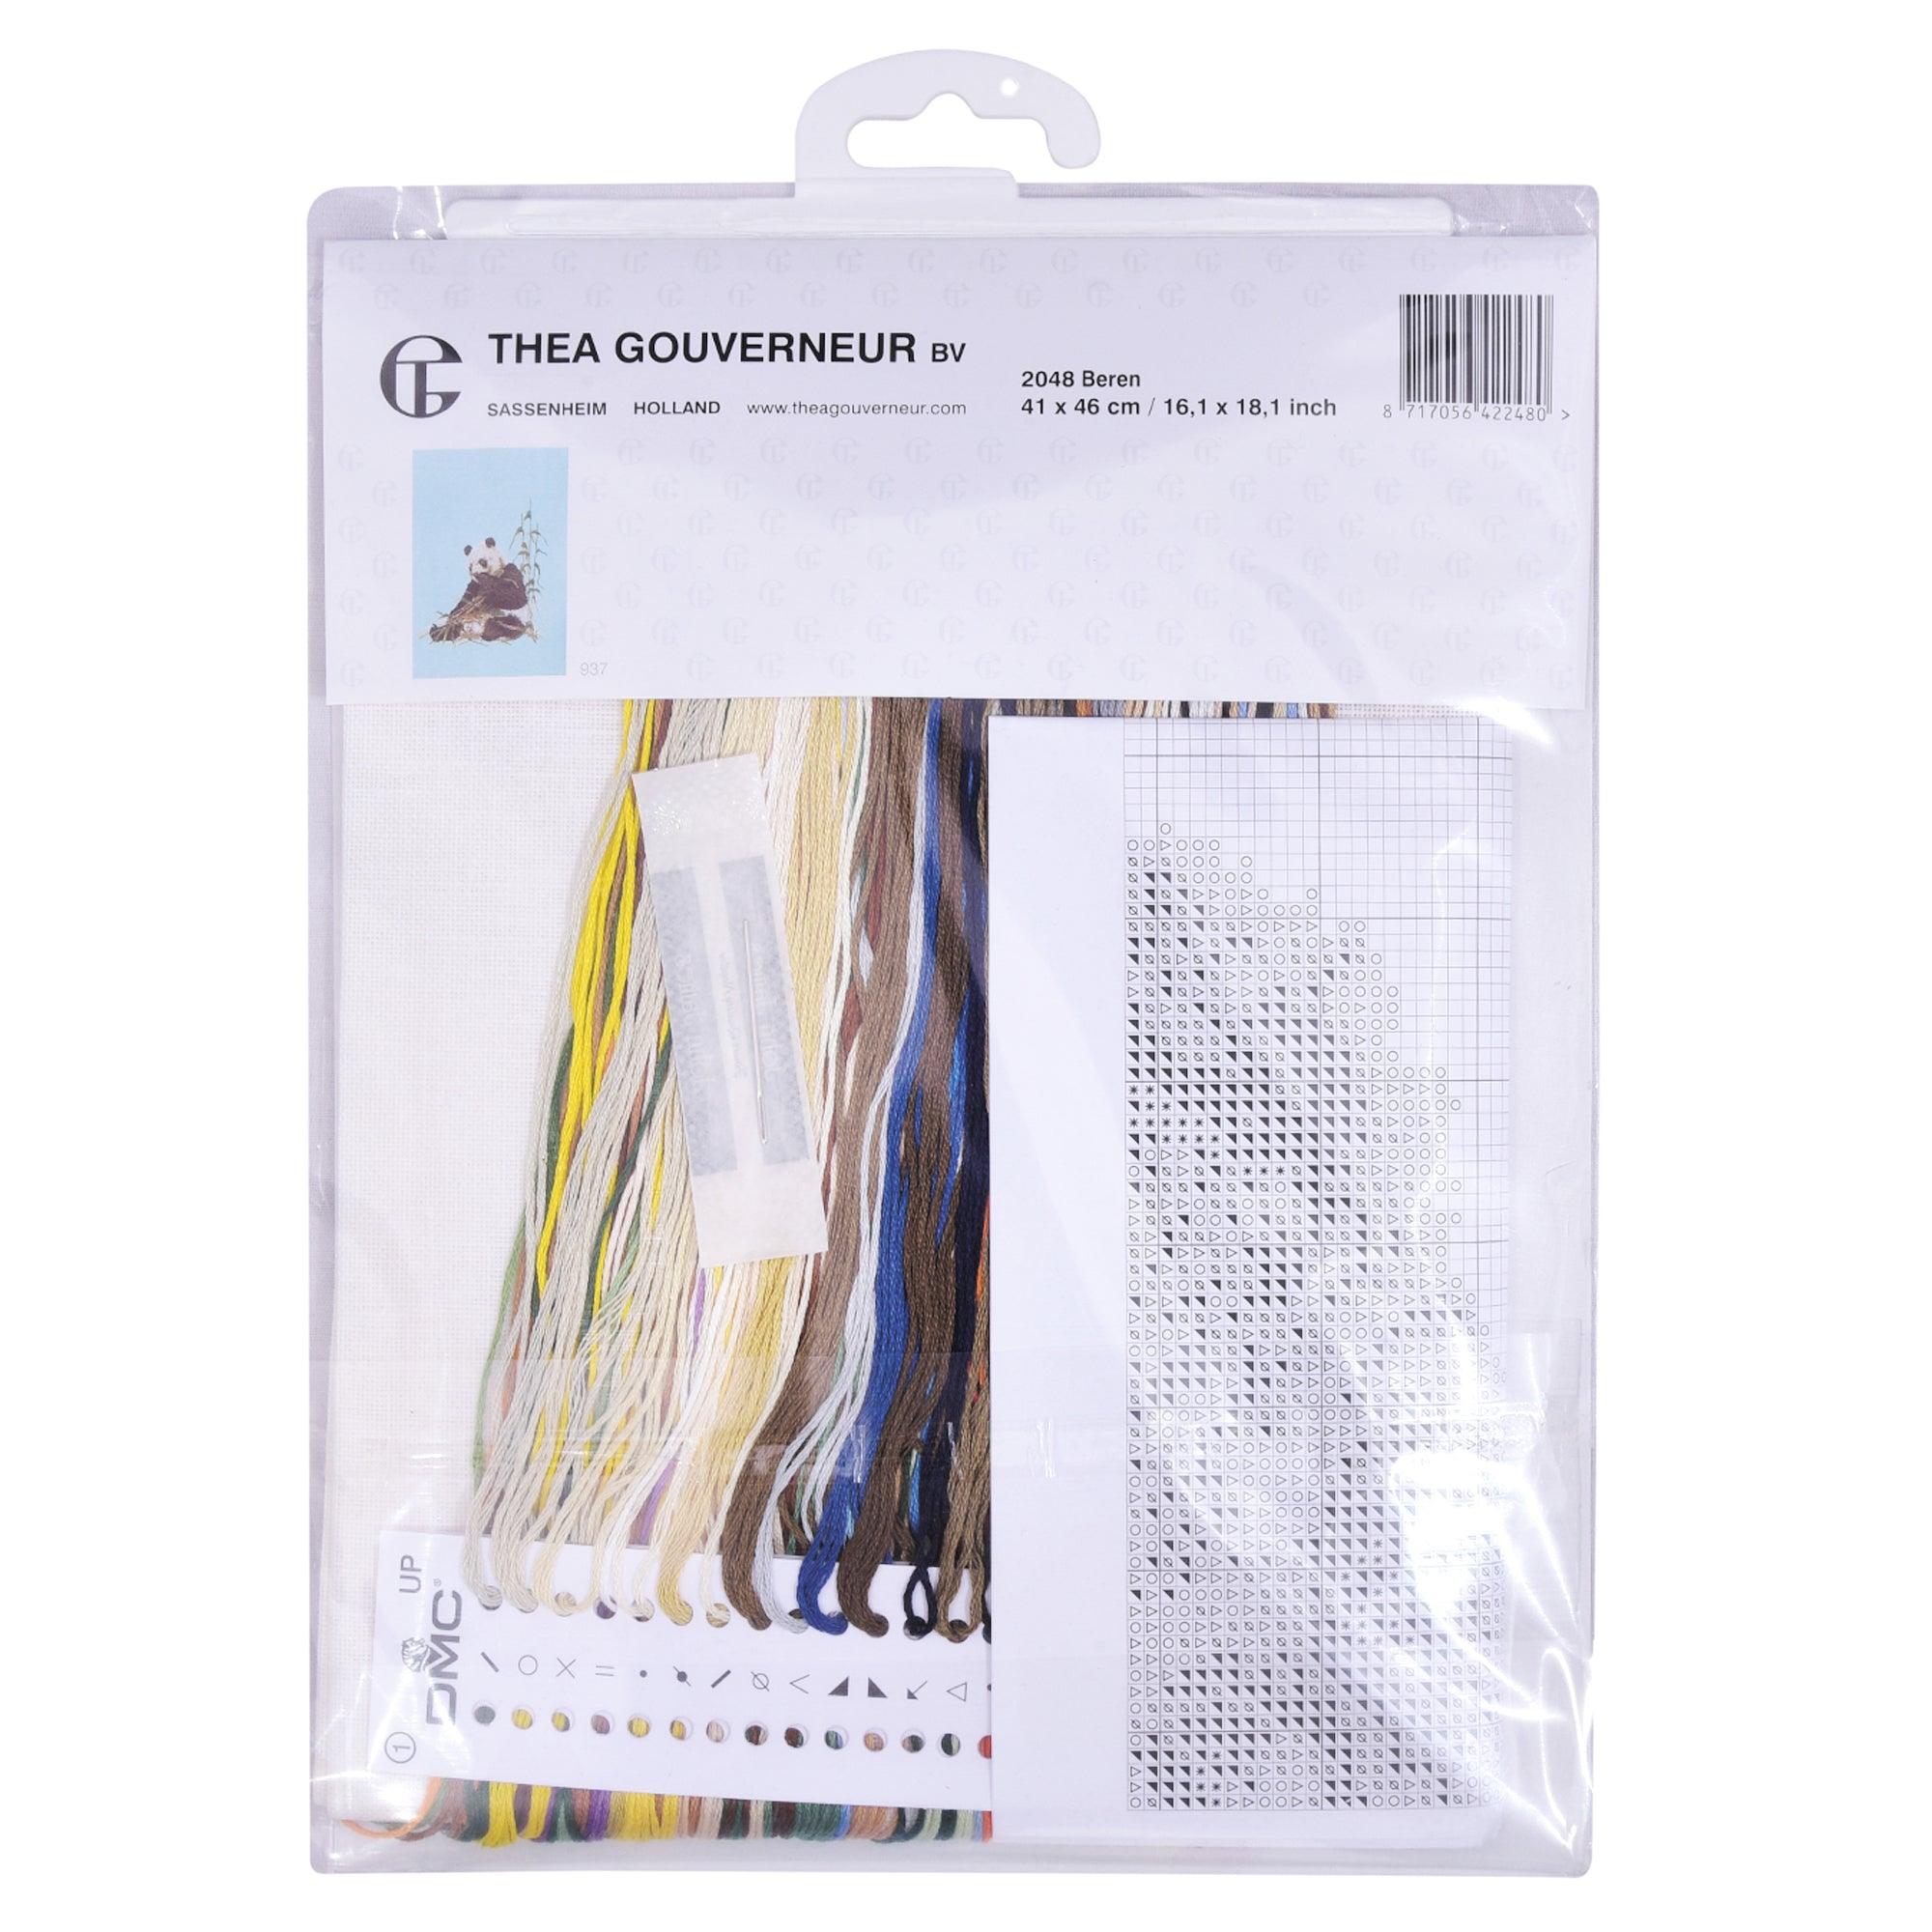 Thea Gouverneur - Counted Cross Stitch Kit - Teddy Bears - Linen - 32 count - 2048 - Thea Gouverneur Since 1959